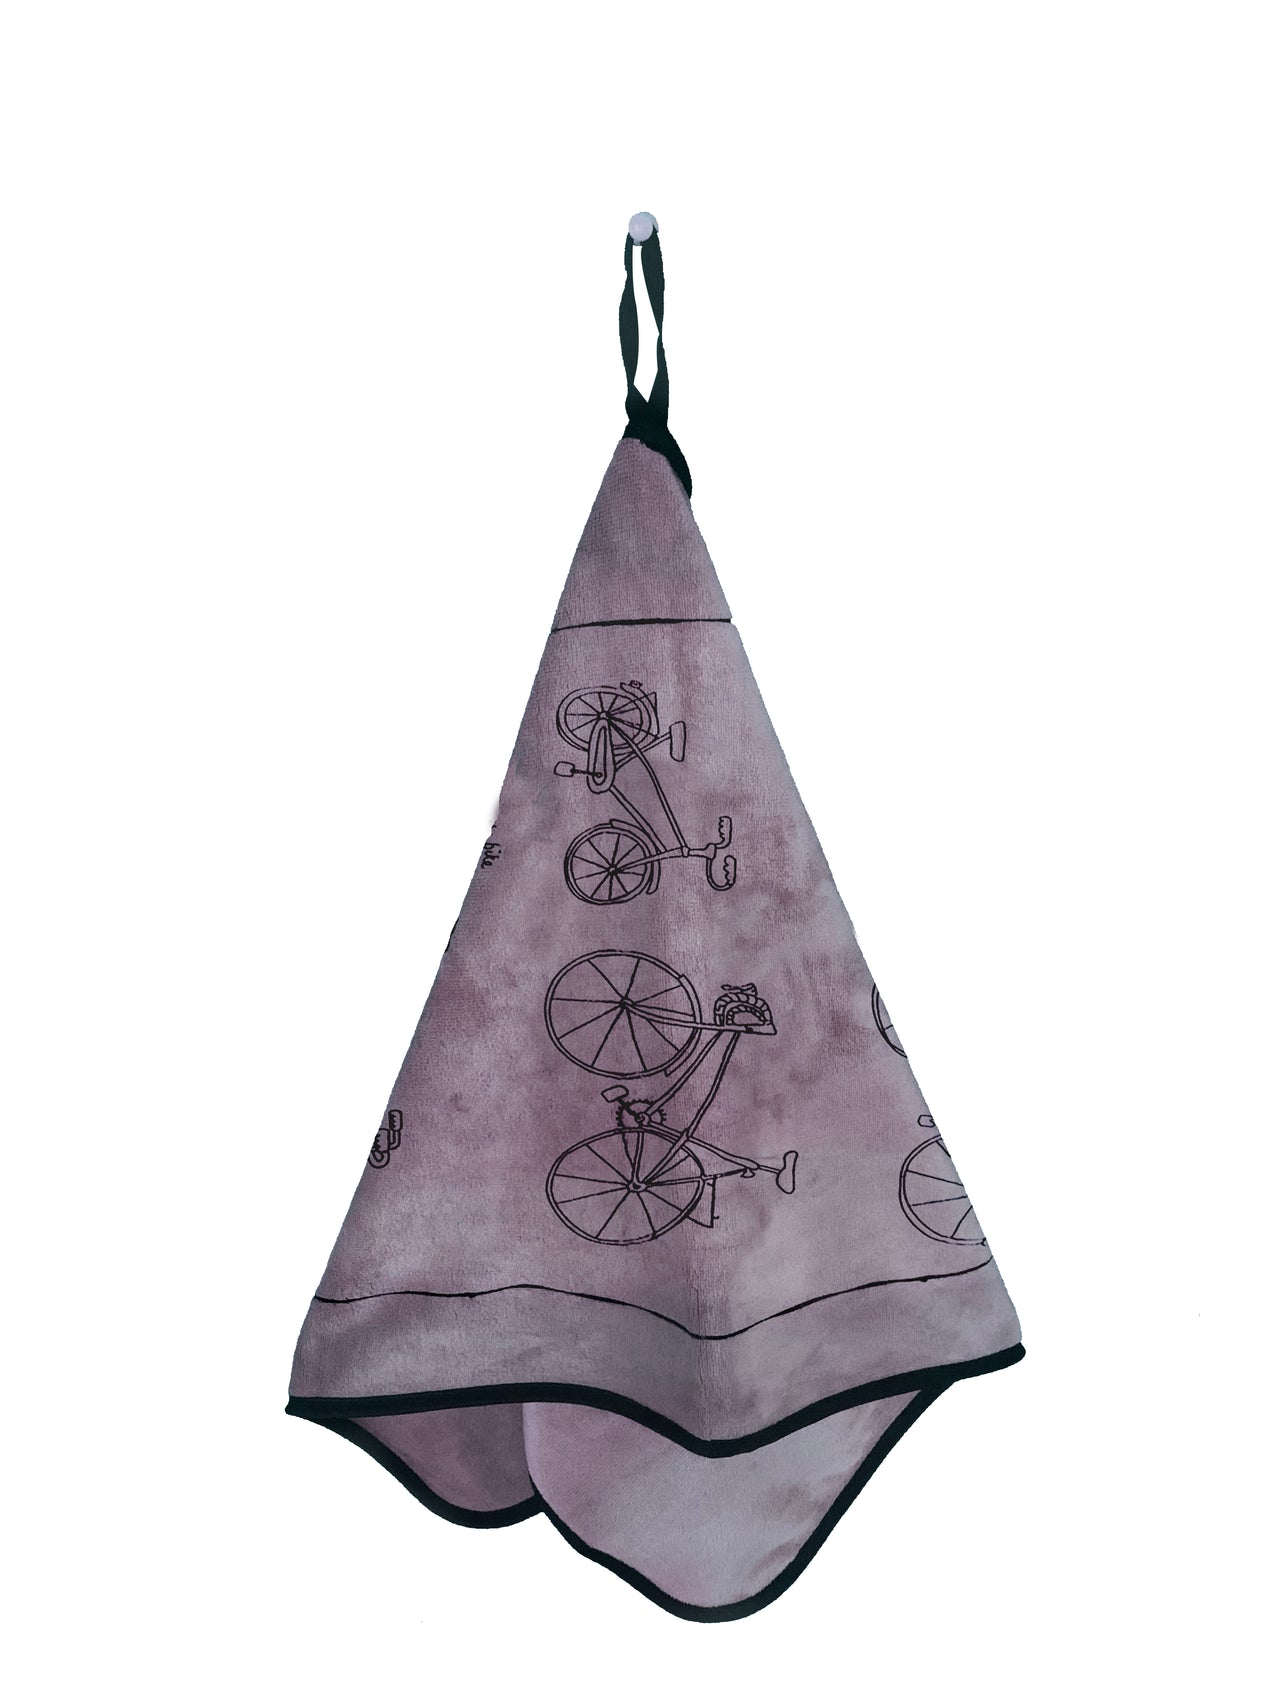 SuperSoft Pedal Power Kitchen/Gym Towel